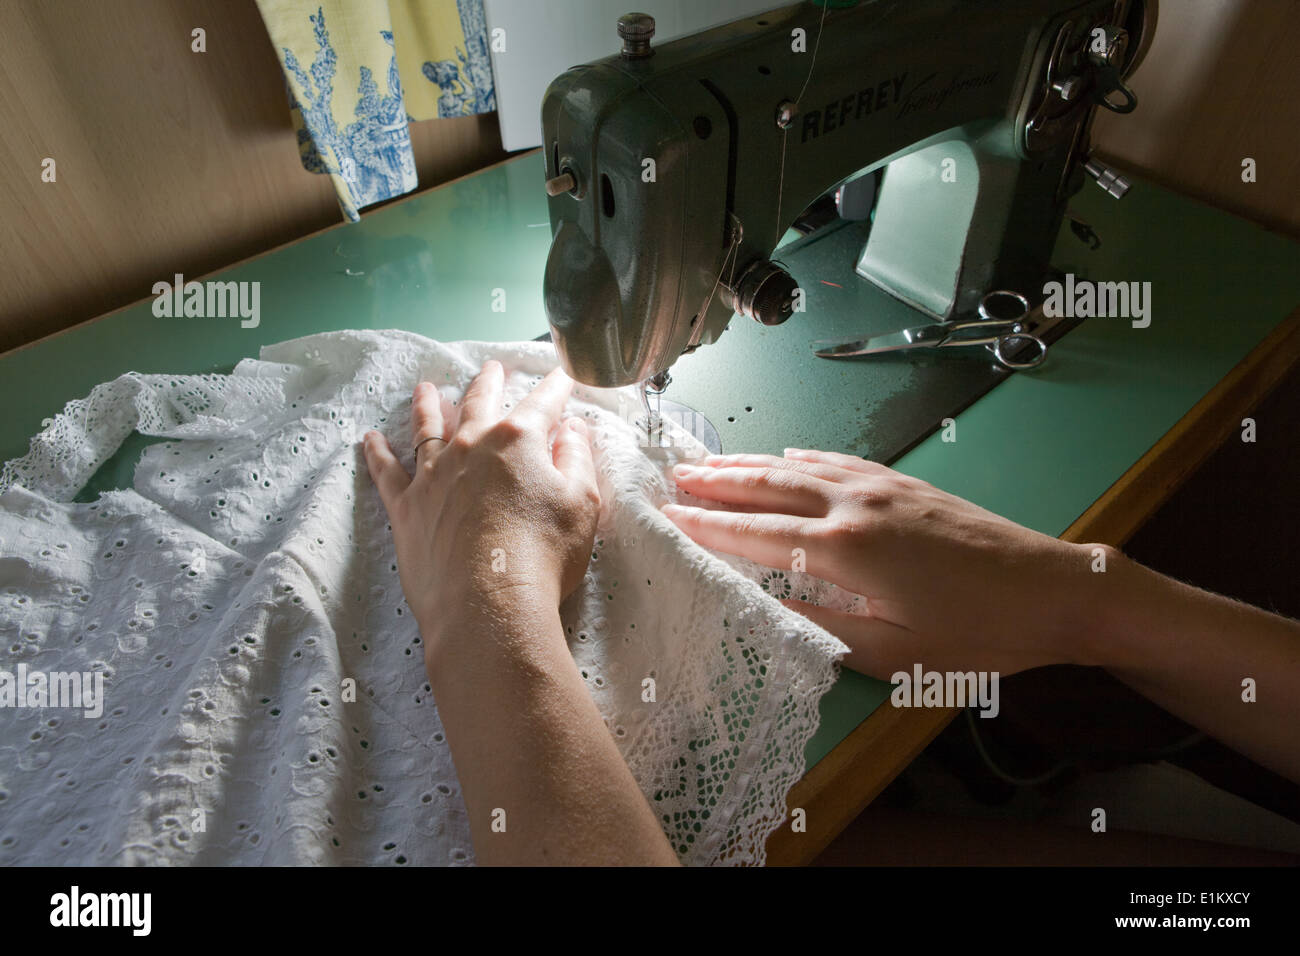 Hands of a dressmaker supporting a cloth while sewing on a sewing machine, Spain Stock Photo